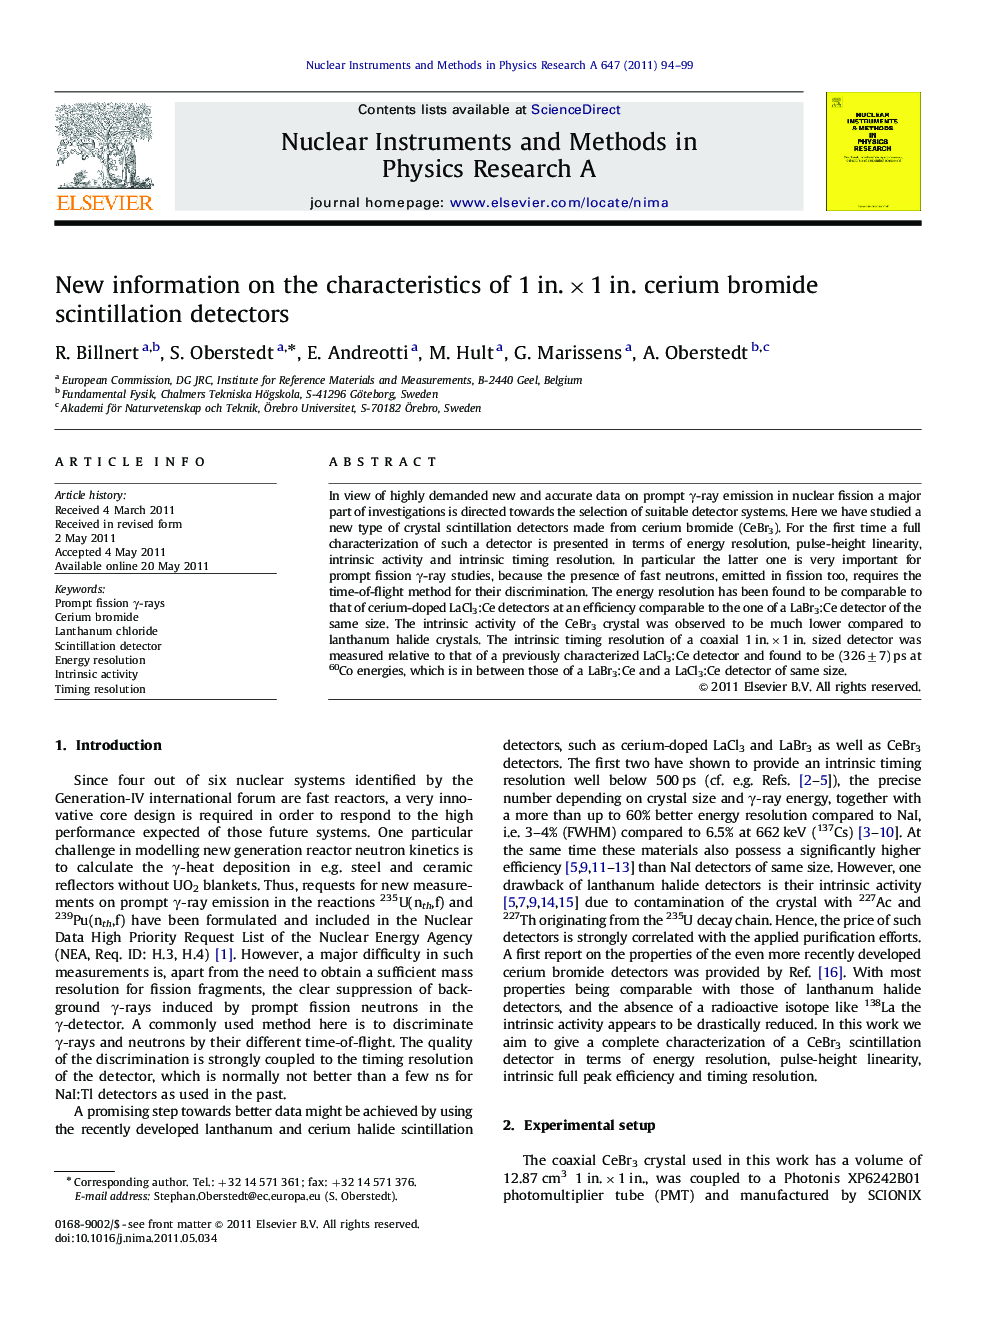 New information on the characteristics of 1 in.×1 in. cerium bromide scintillation detectors